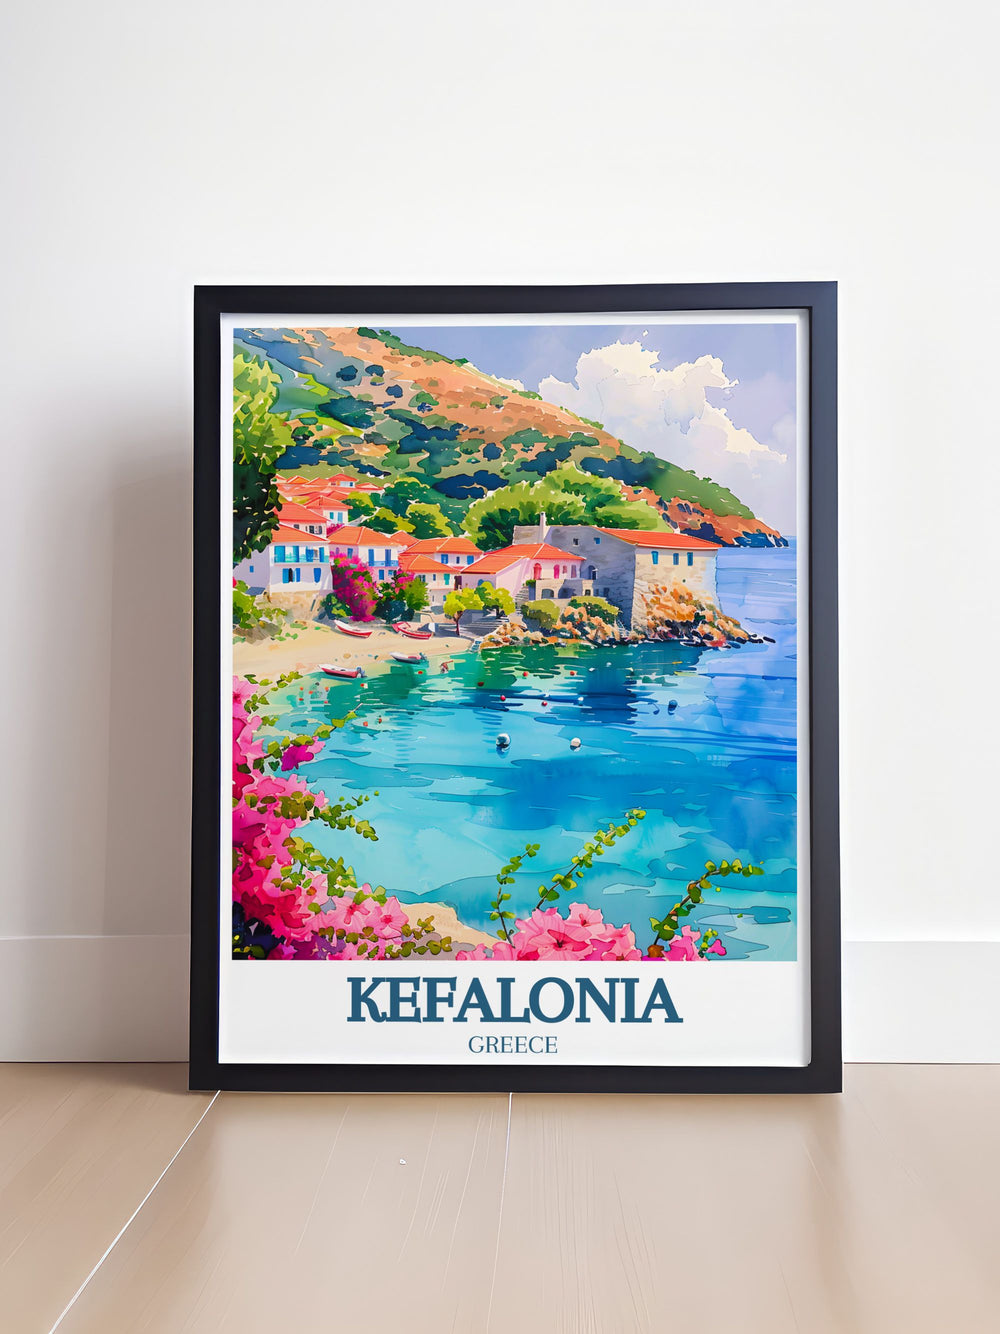 Travel poster of Kefalonia, showcasing its stunning coastlines, historical sites, and vibrant culture. The detailed artwork captures the essence of this Greek islands beauty and charm.